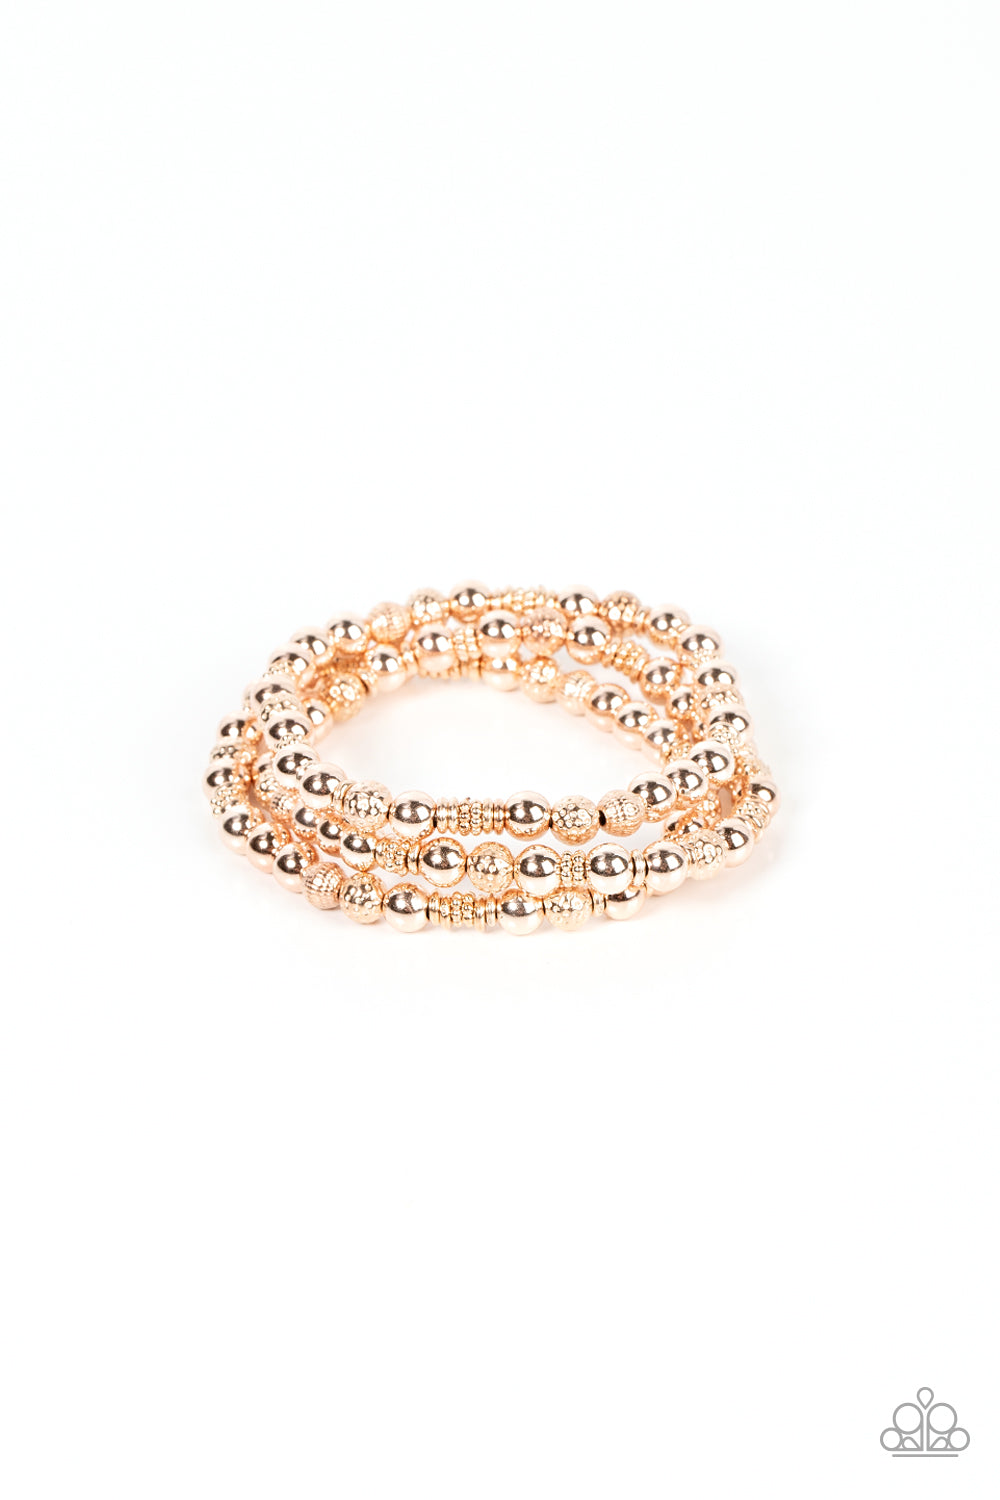 Boundless Boundaries - Rose Gold- Paparazzi Accessories - VJ Bedazzled Jewelry